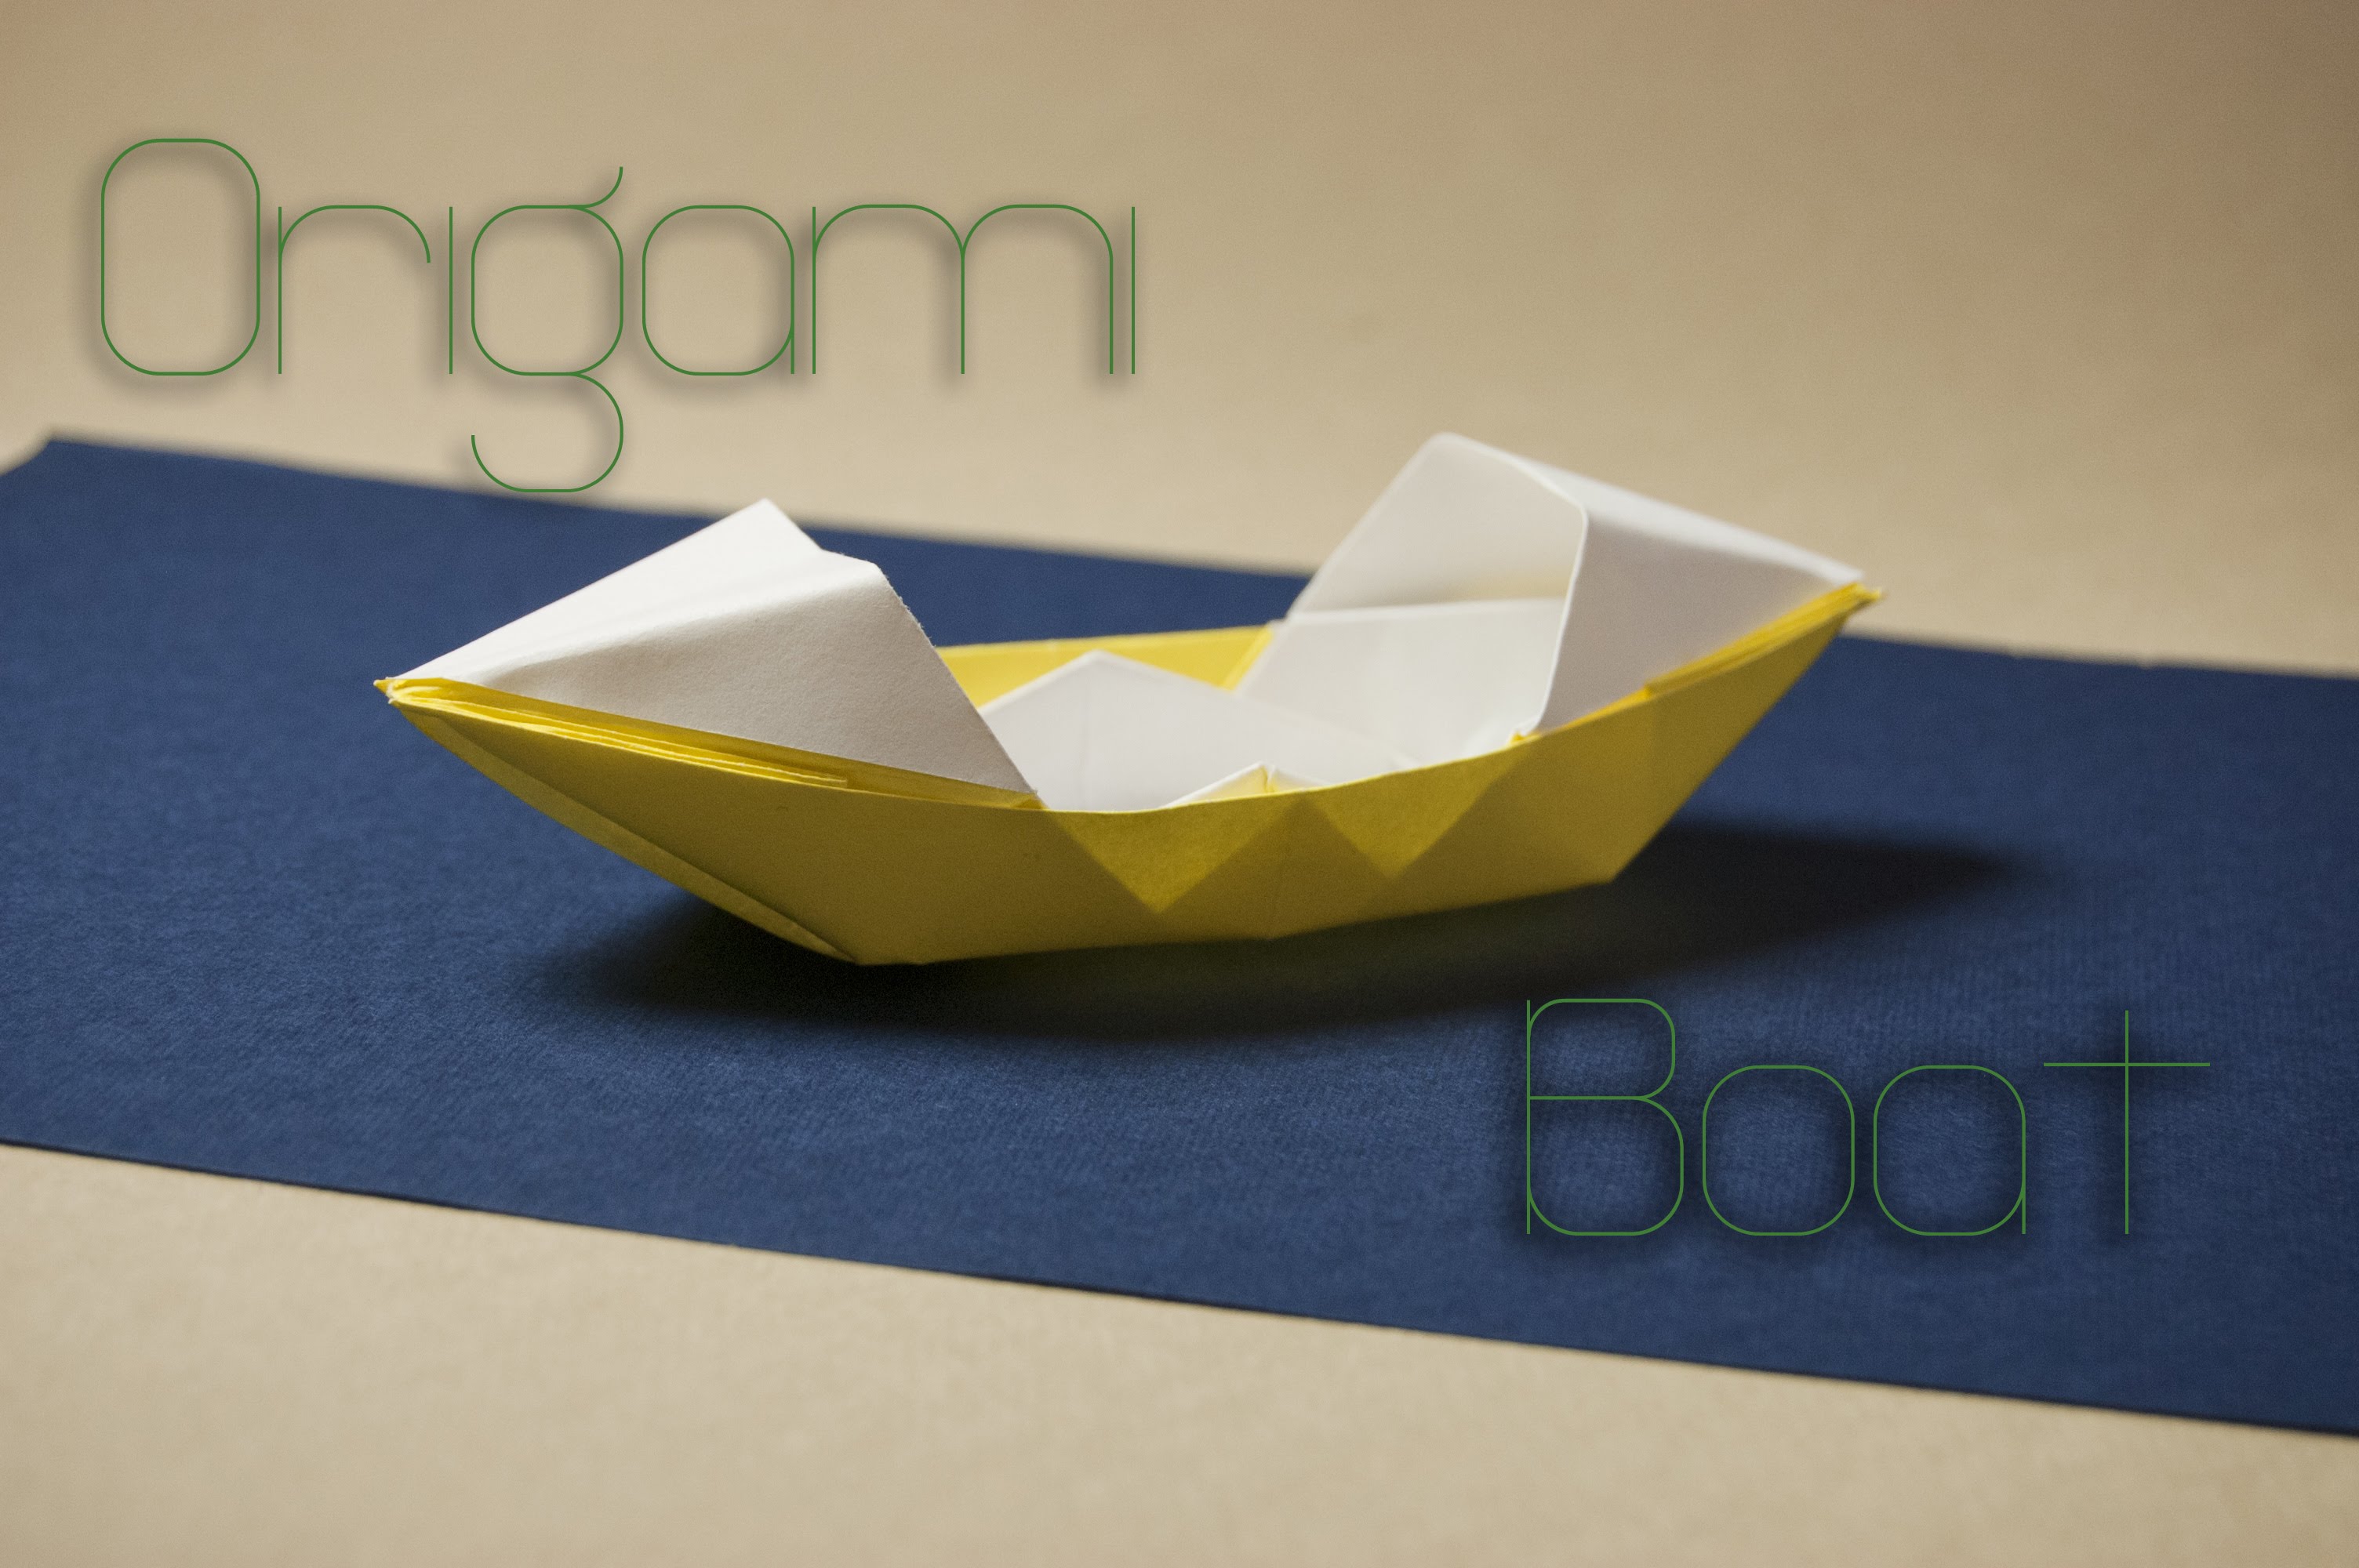 How to make an origami boat | Paper ship - YouTube